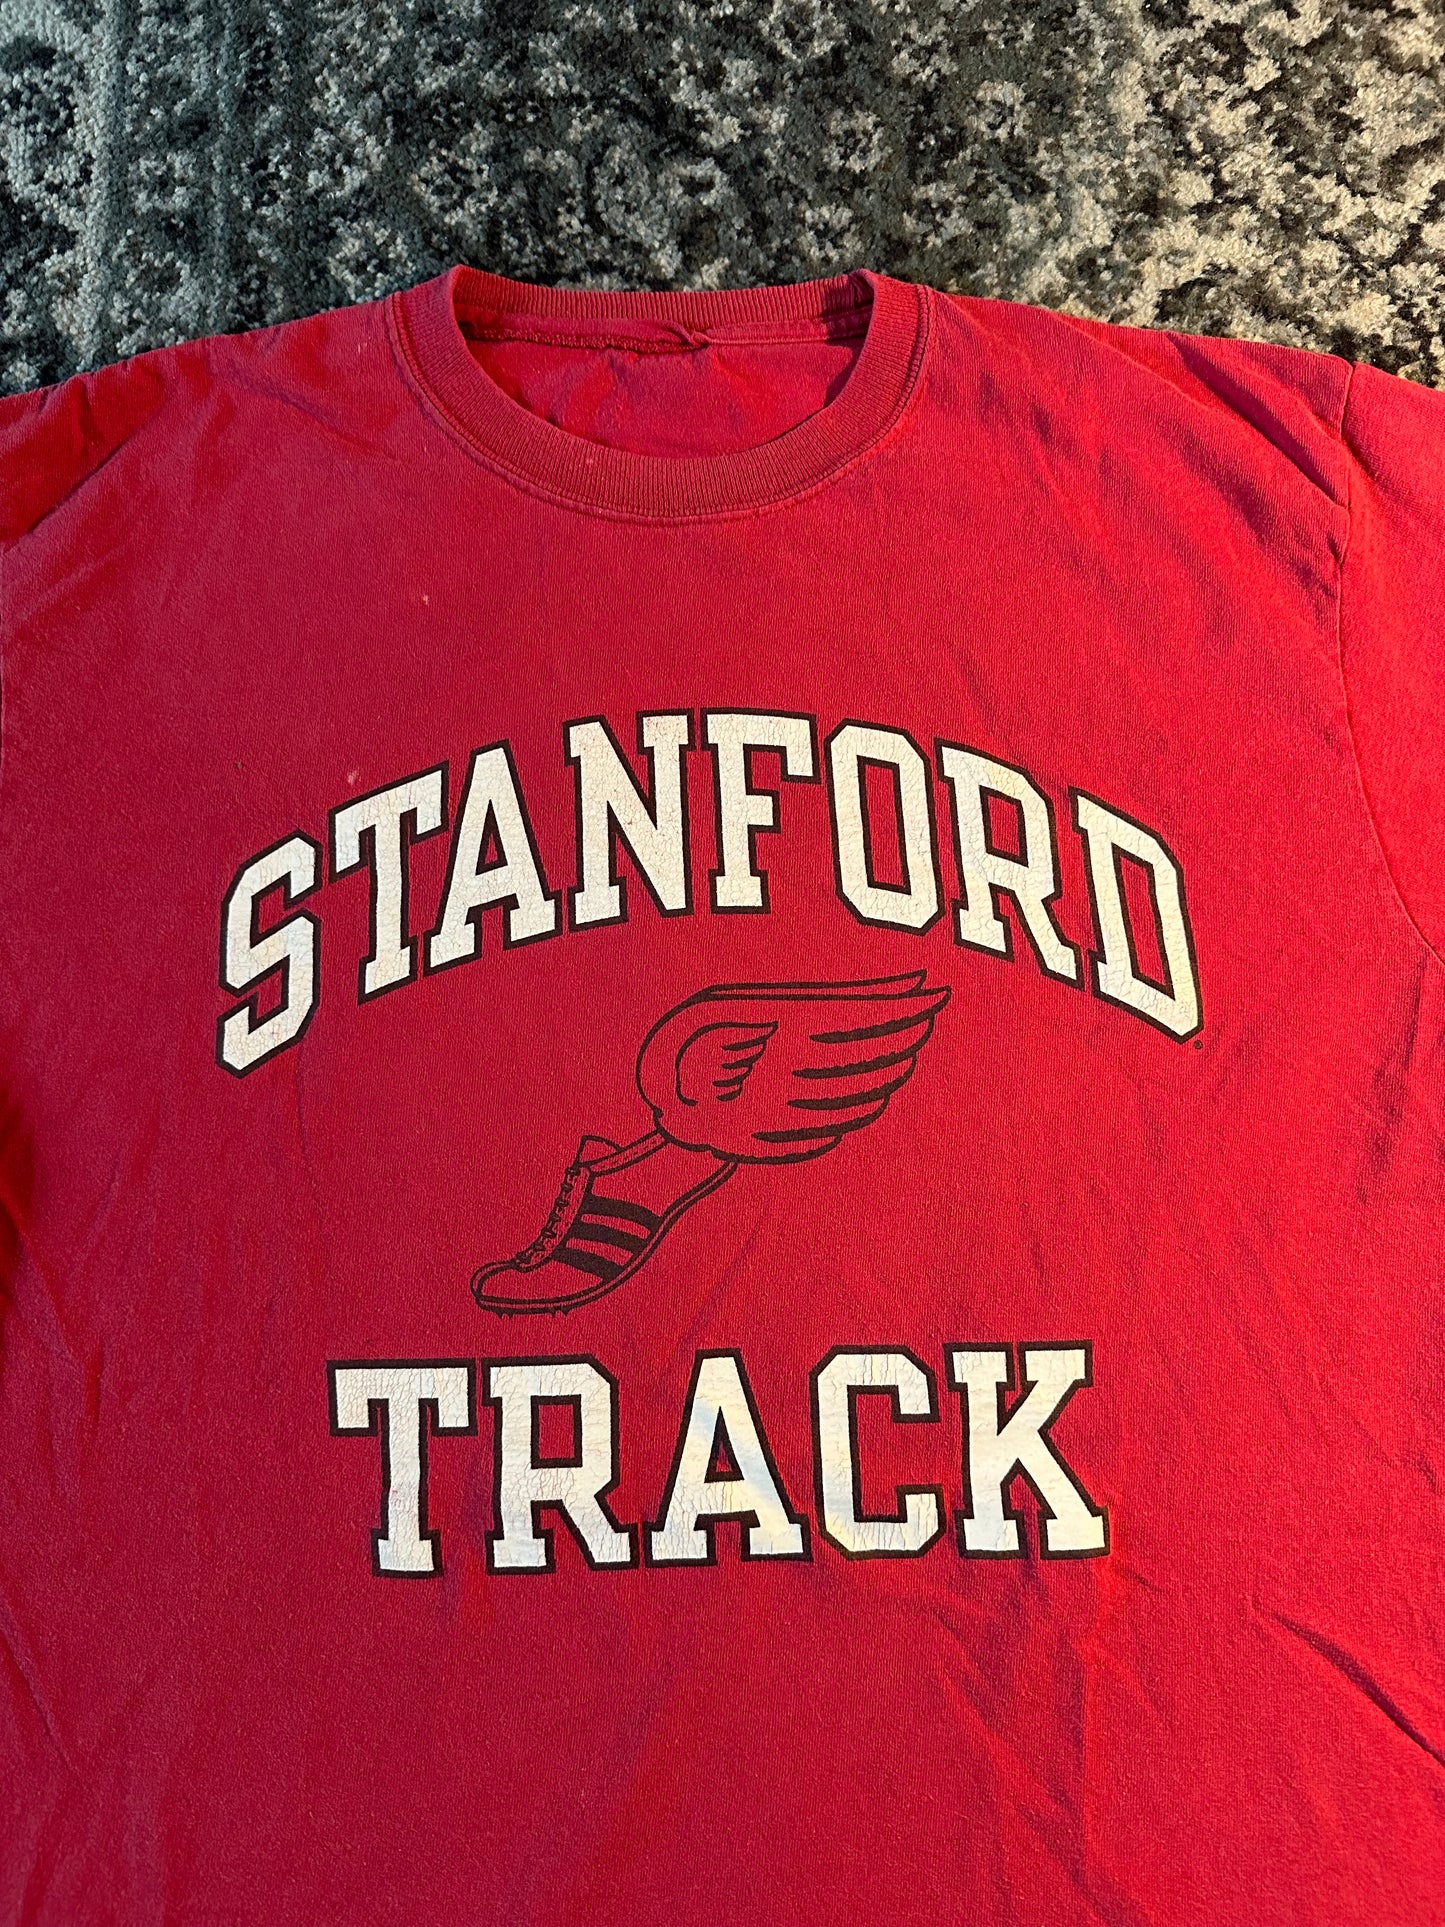 Stanford Track Graphic Tee size L